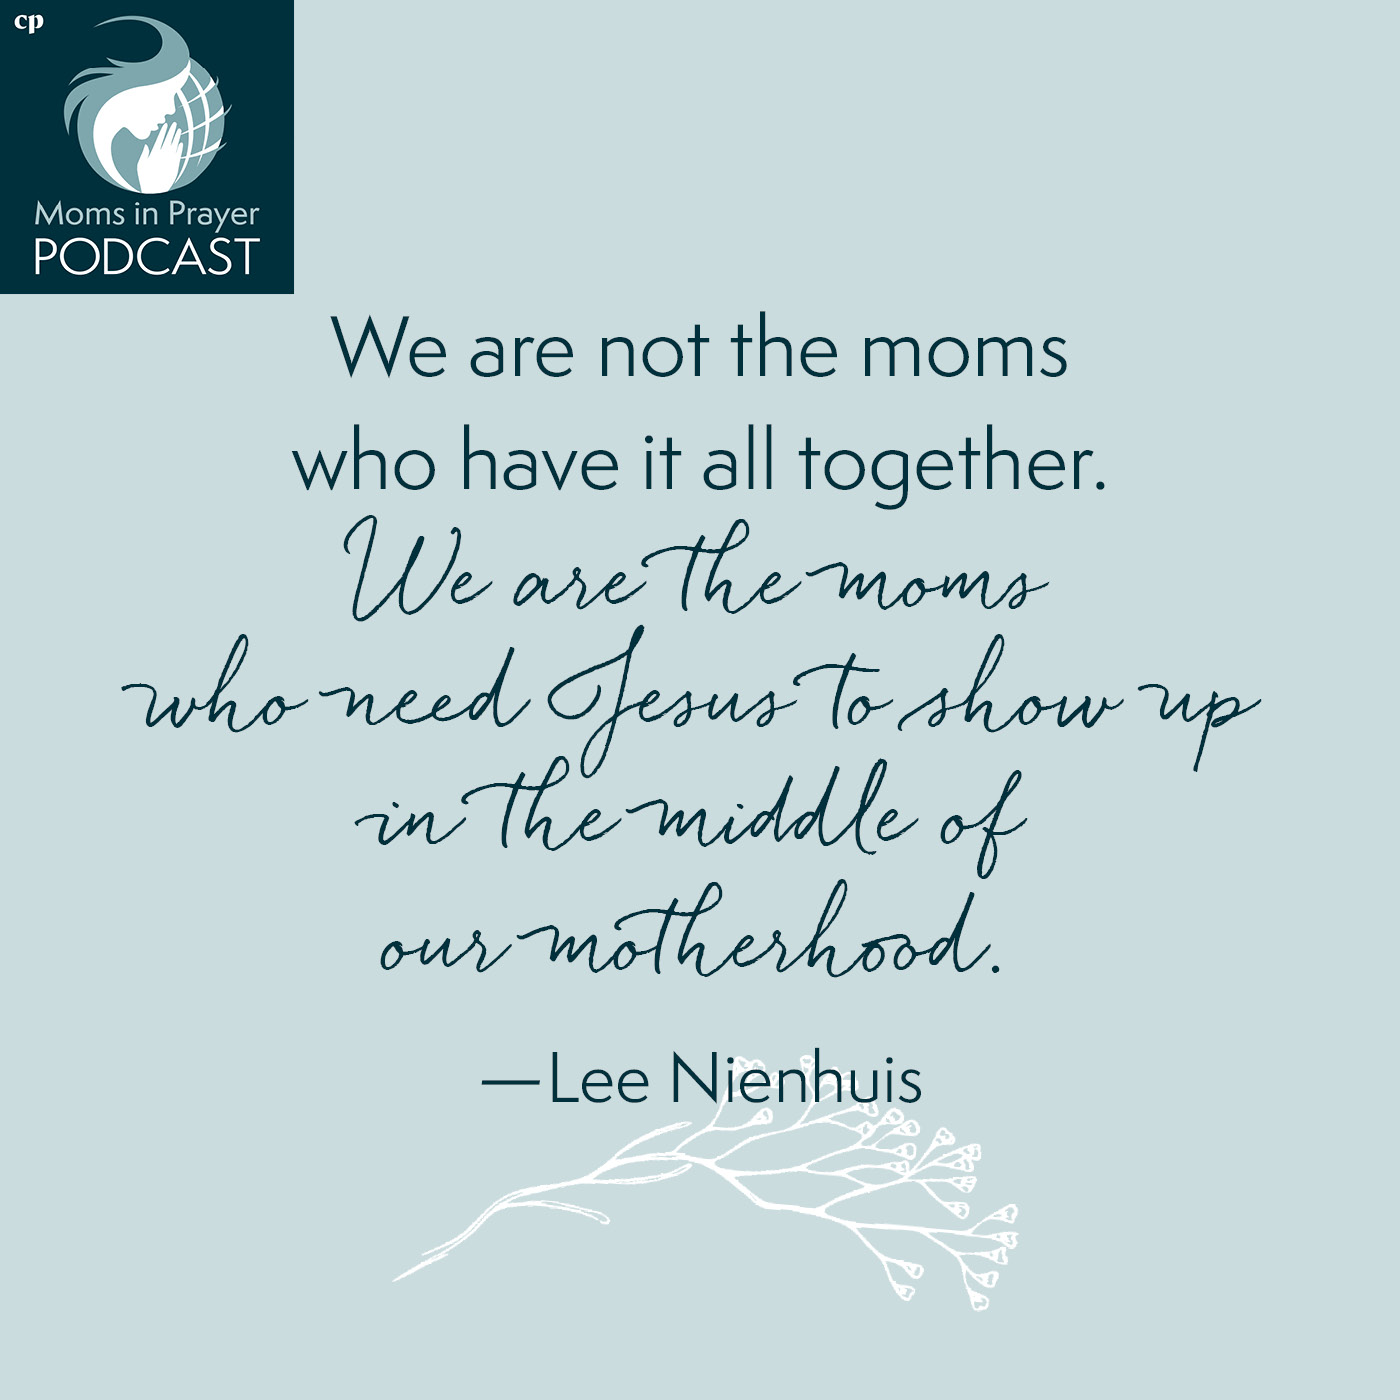 We are not moms who have it all together. We are moms who need Jesus.